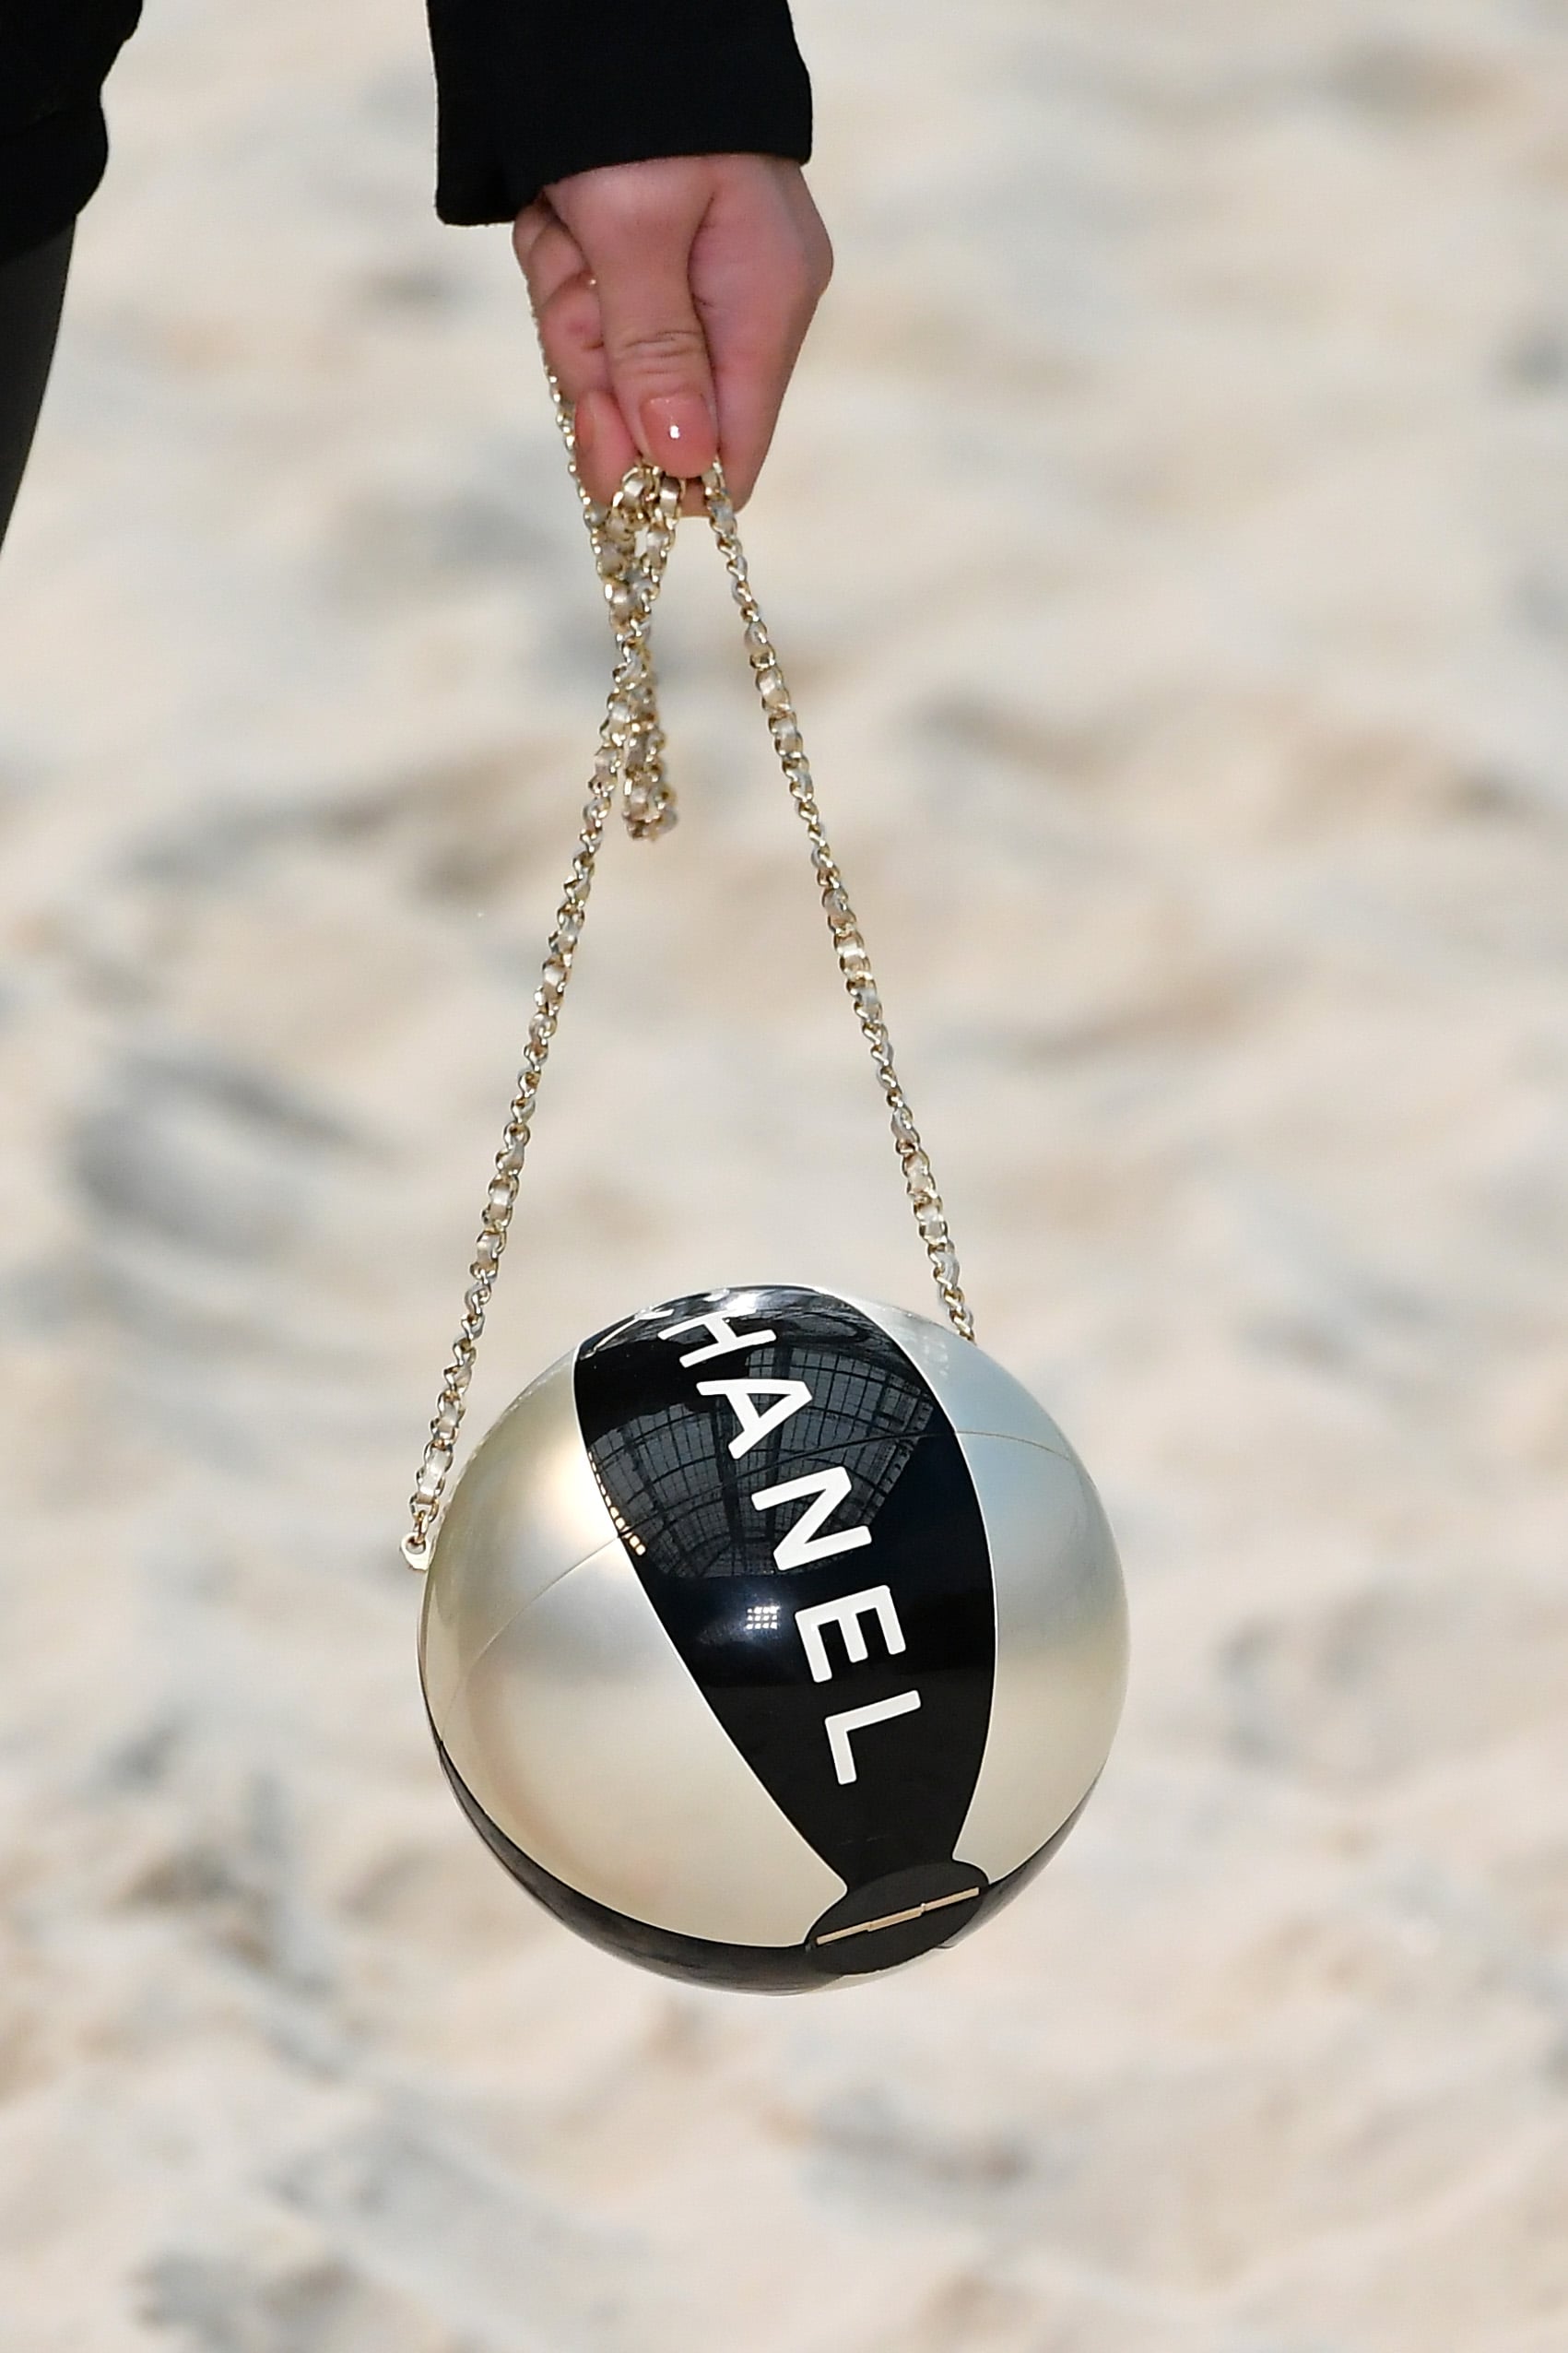 The Chanel Beach Ball Bag, Nothing Will Excite You Like the Chanel Beach Ball  Bag, Except Maybe the PVC Sandals